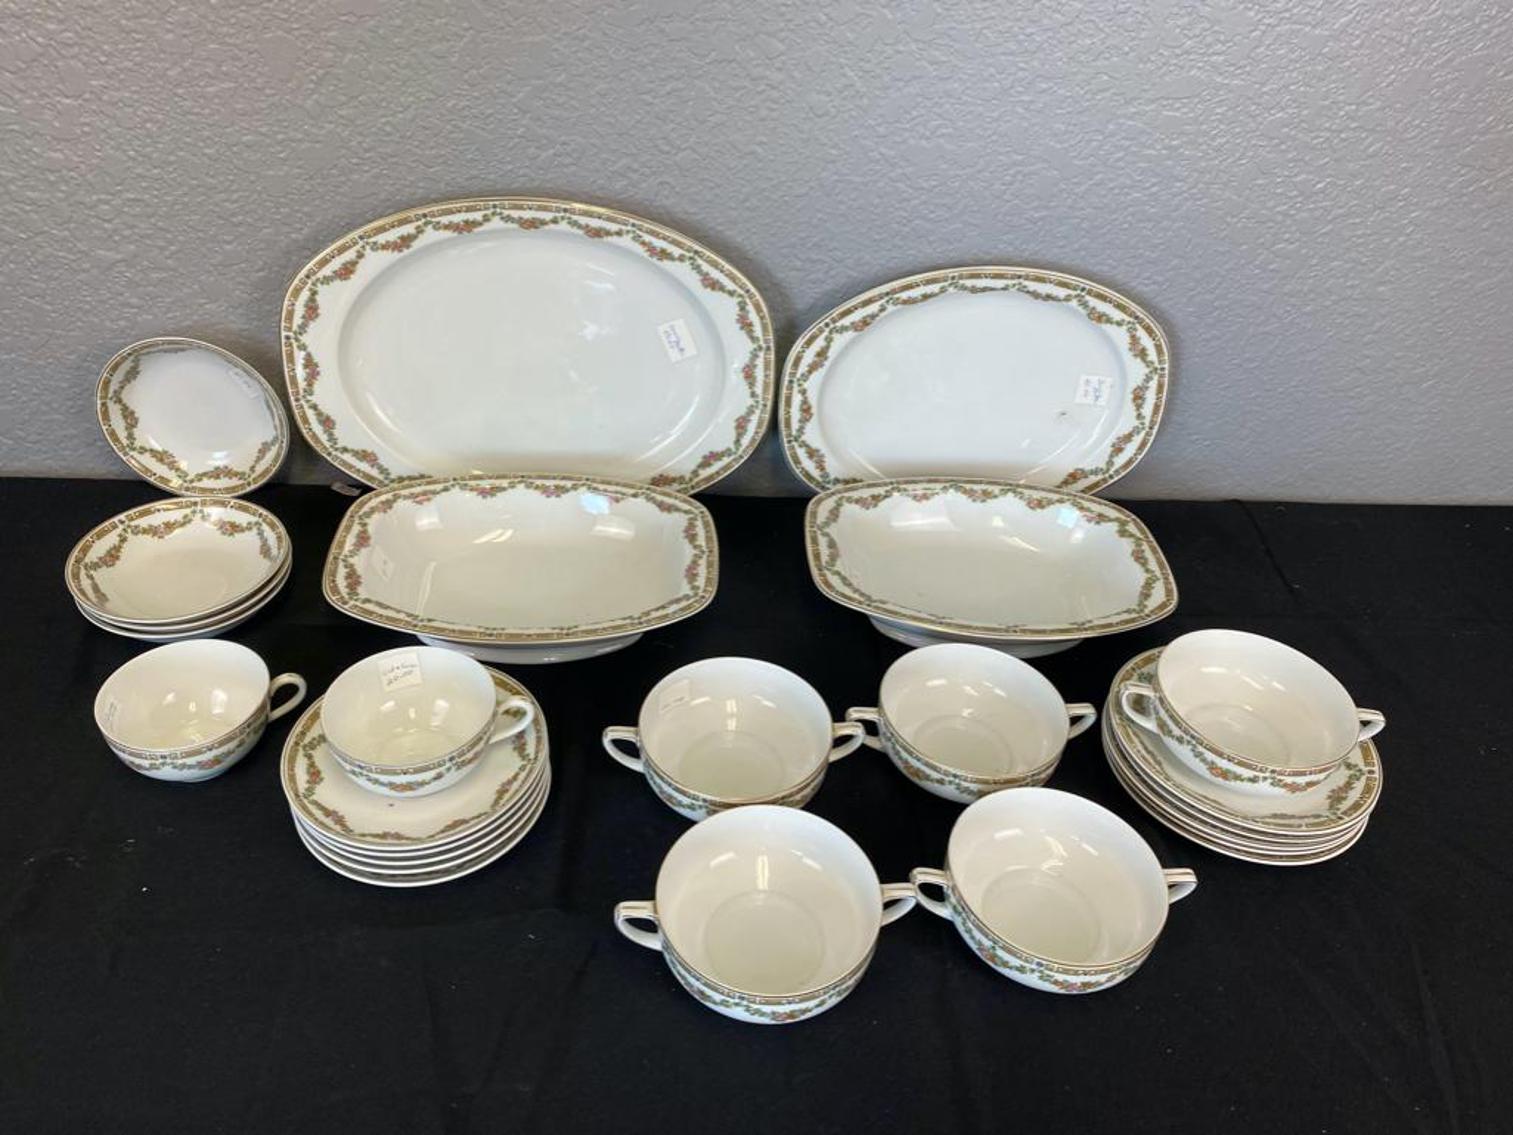 Auction Has Been Extended: Czech Glass-Ware Collections & Tupperware Sets